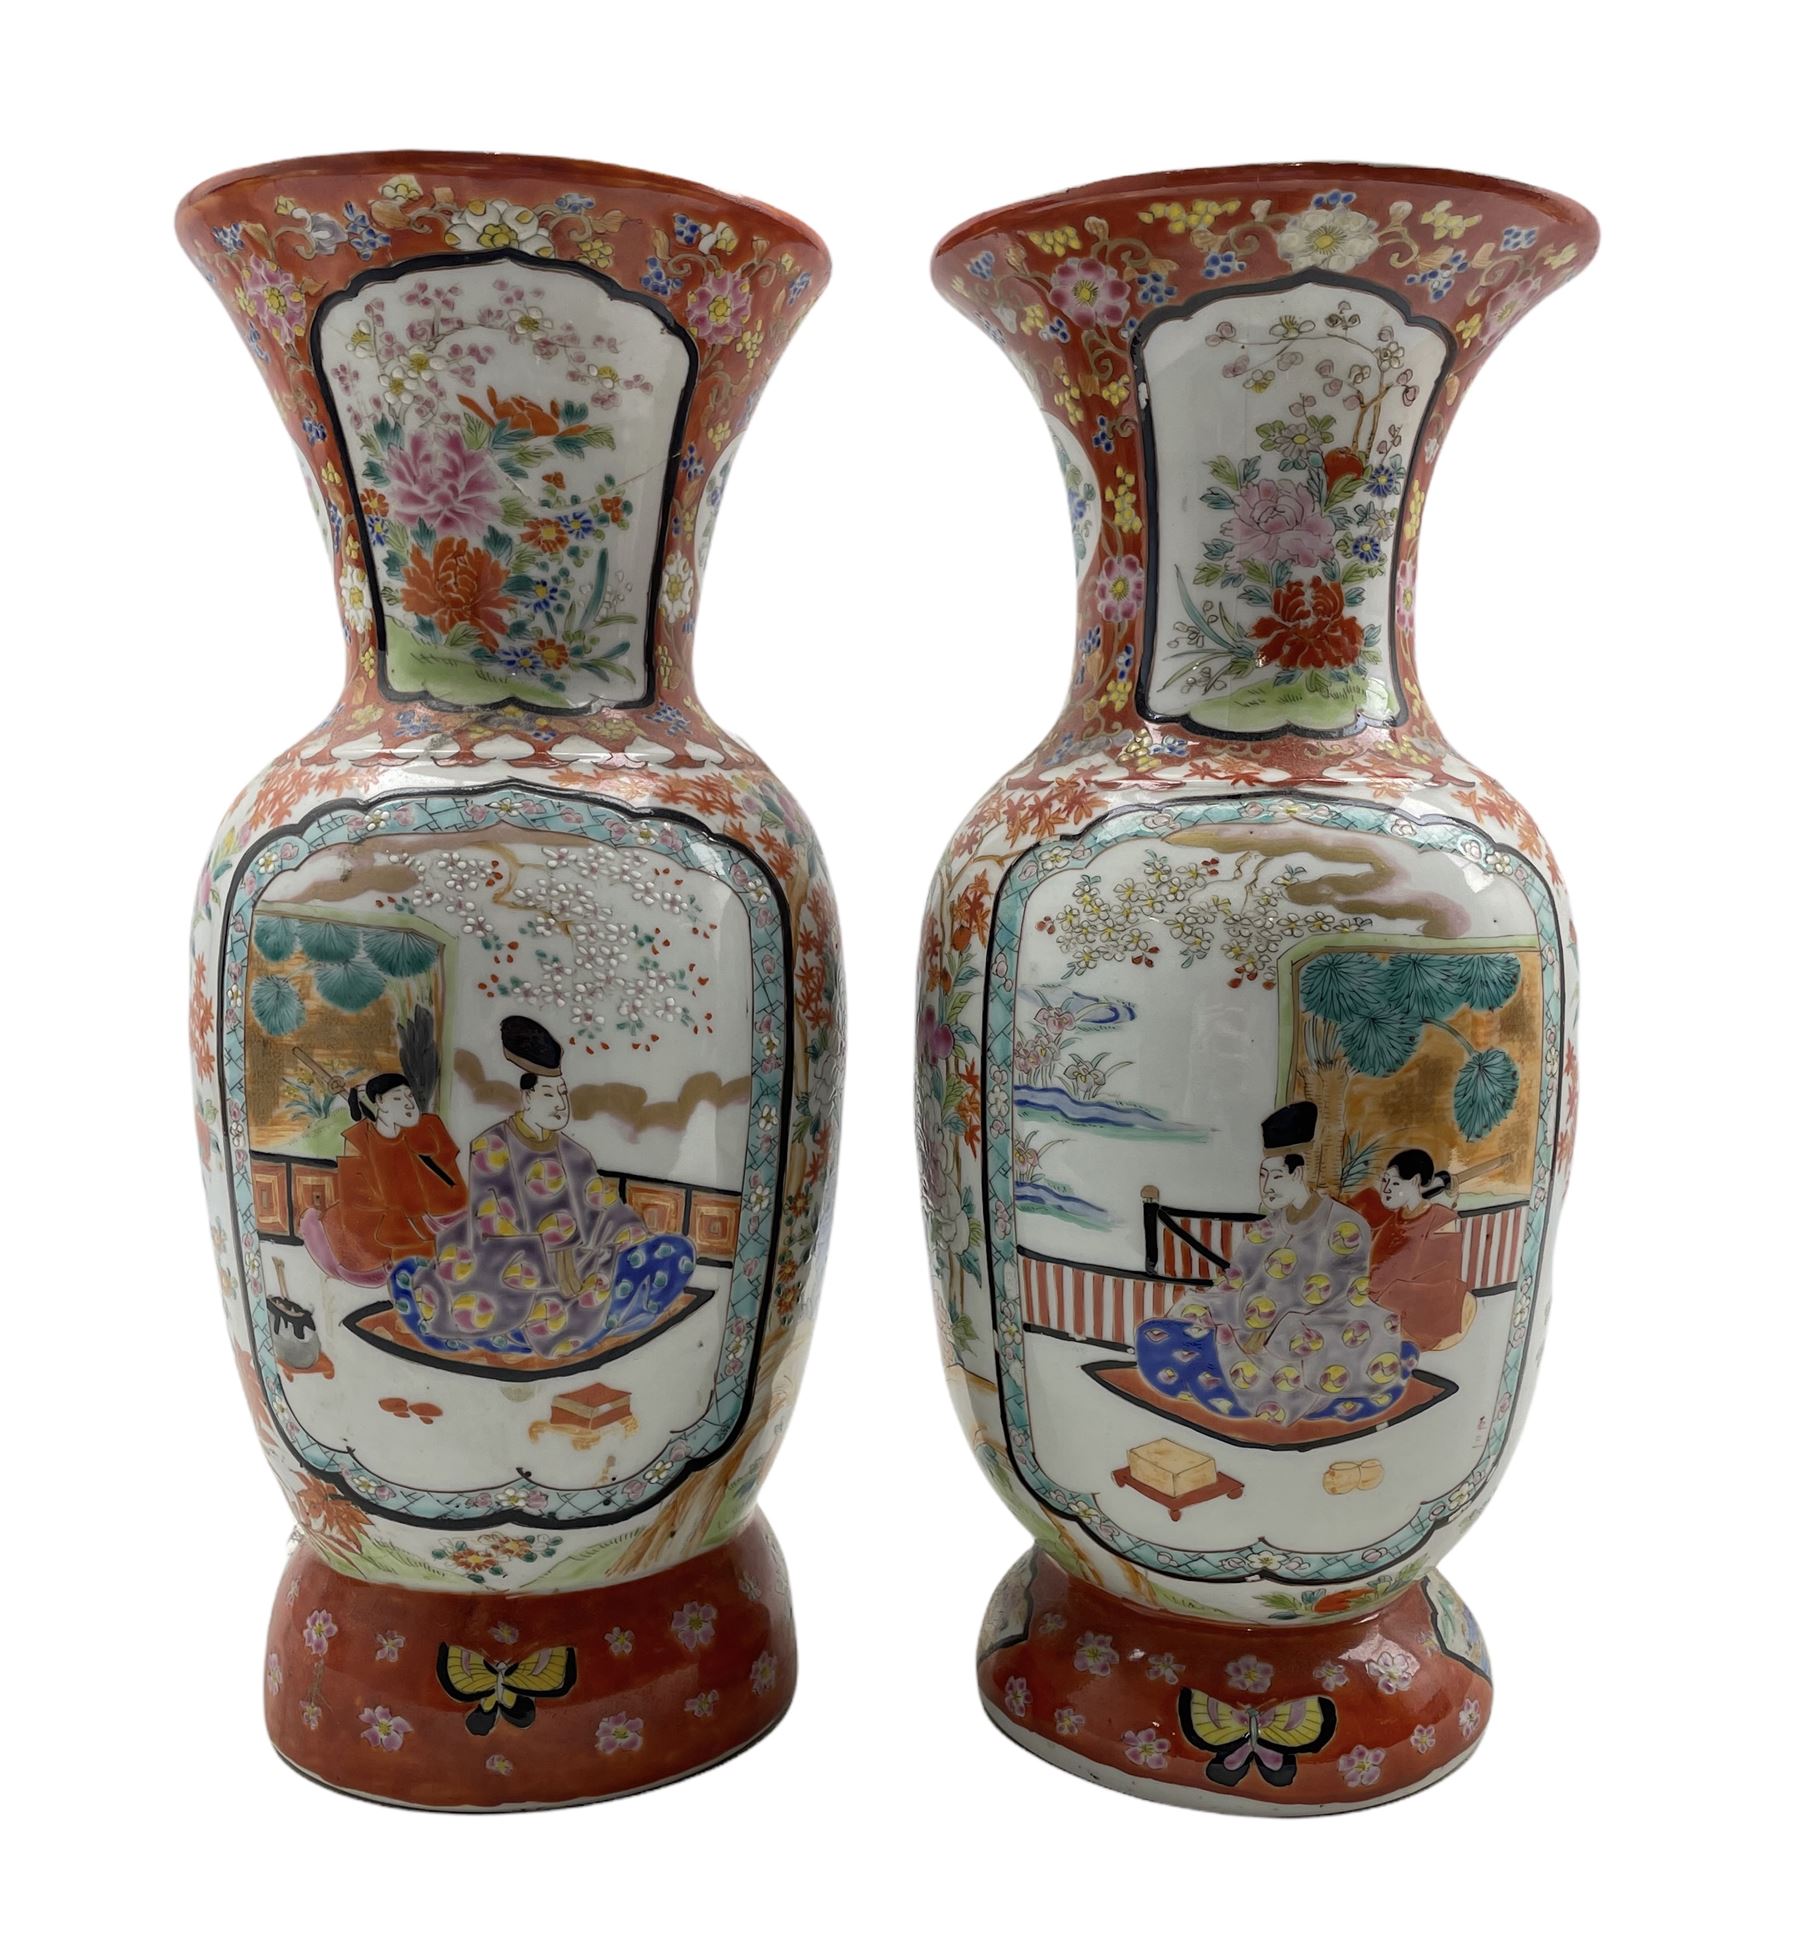 Pair of Japanese Arita porcelain vases painted with panels of bijin